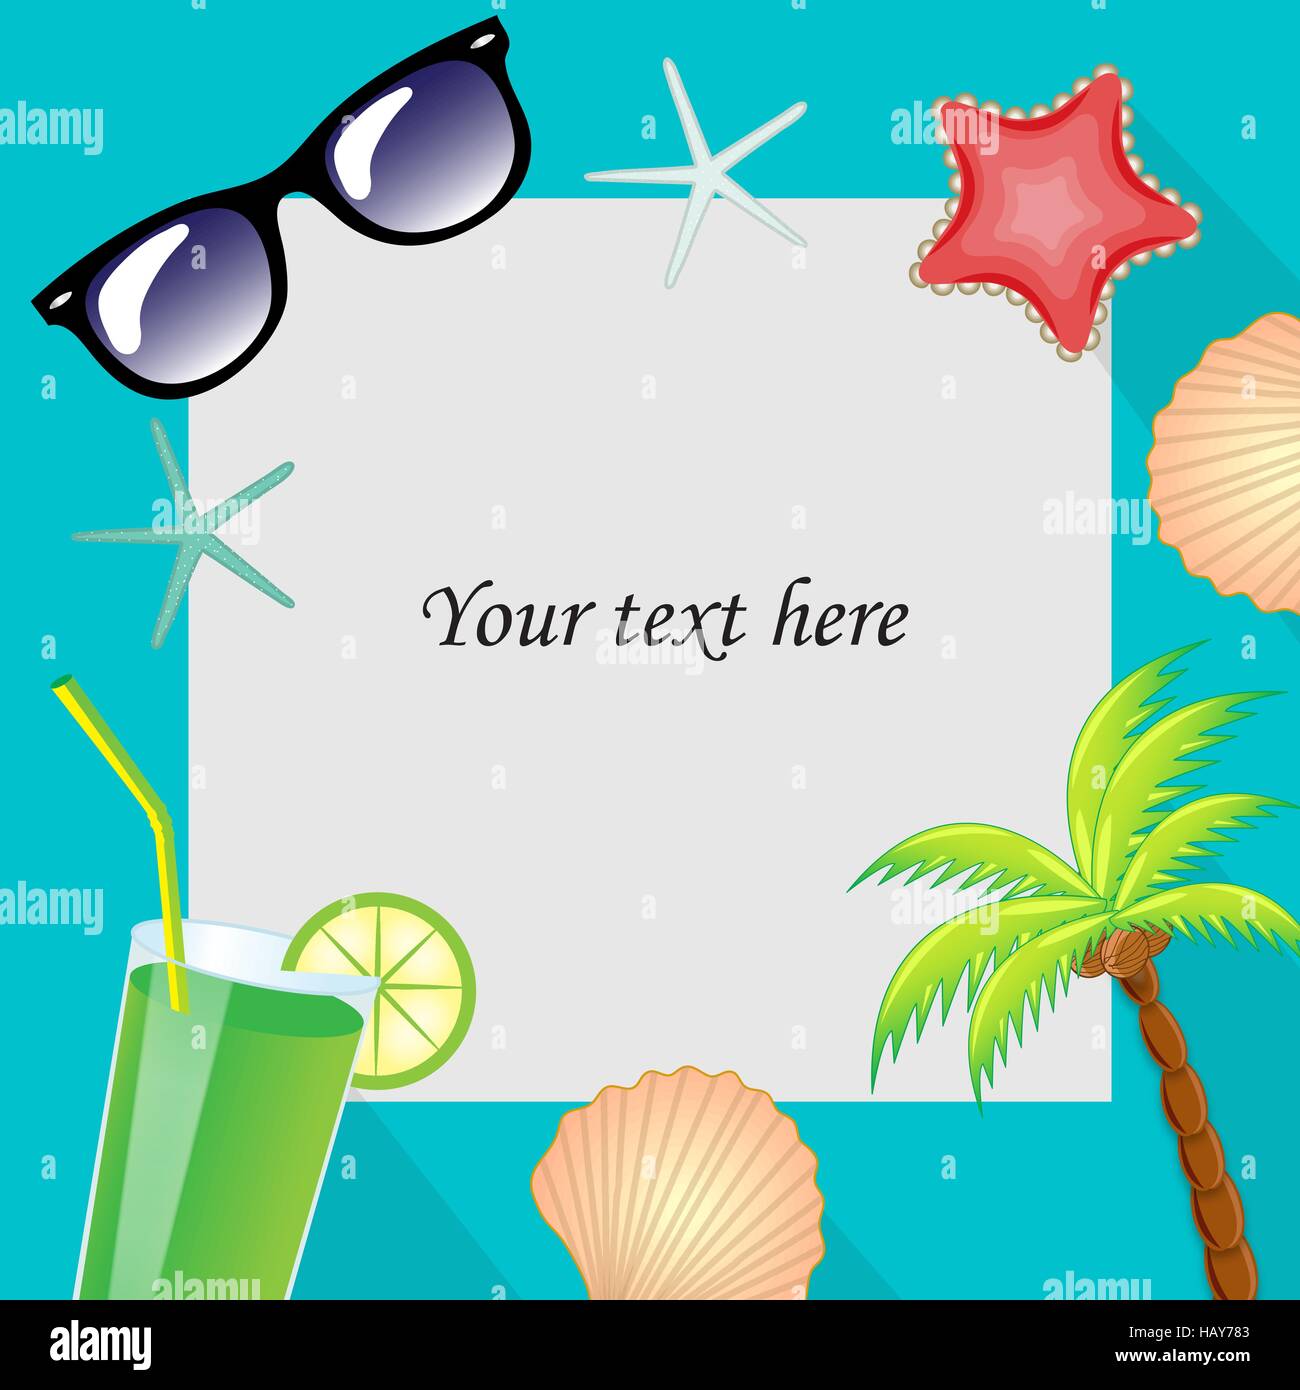 Summertime traveling template with beach summer accessories. Summer template for the text frame. vector illustration. Stock Vector